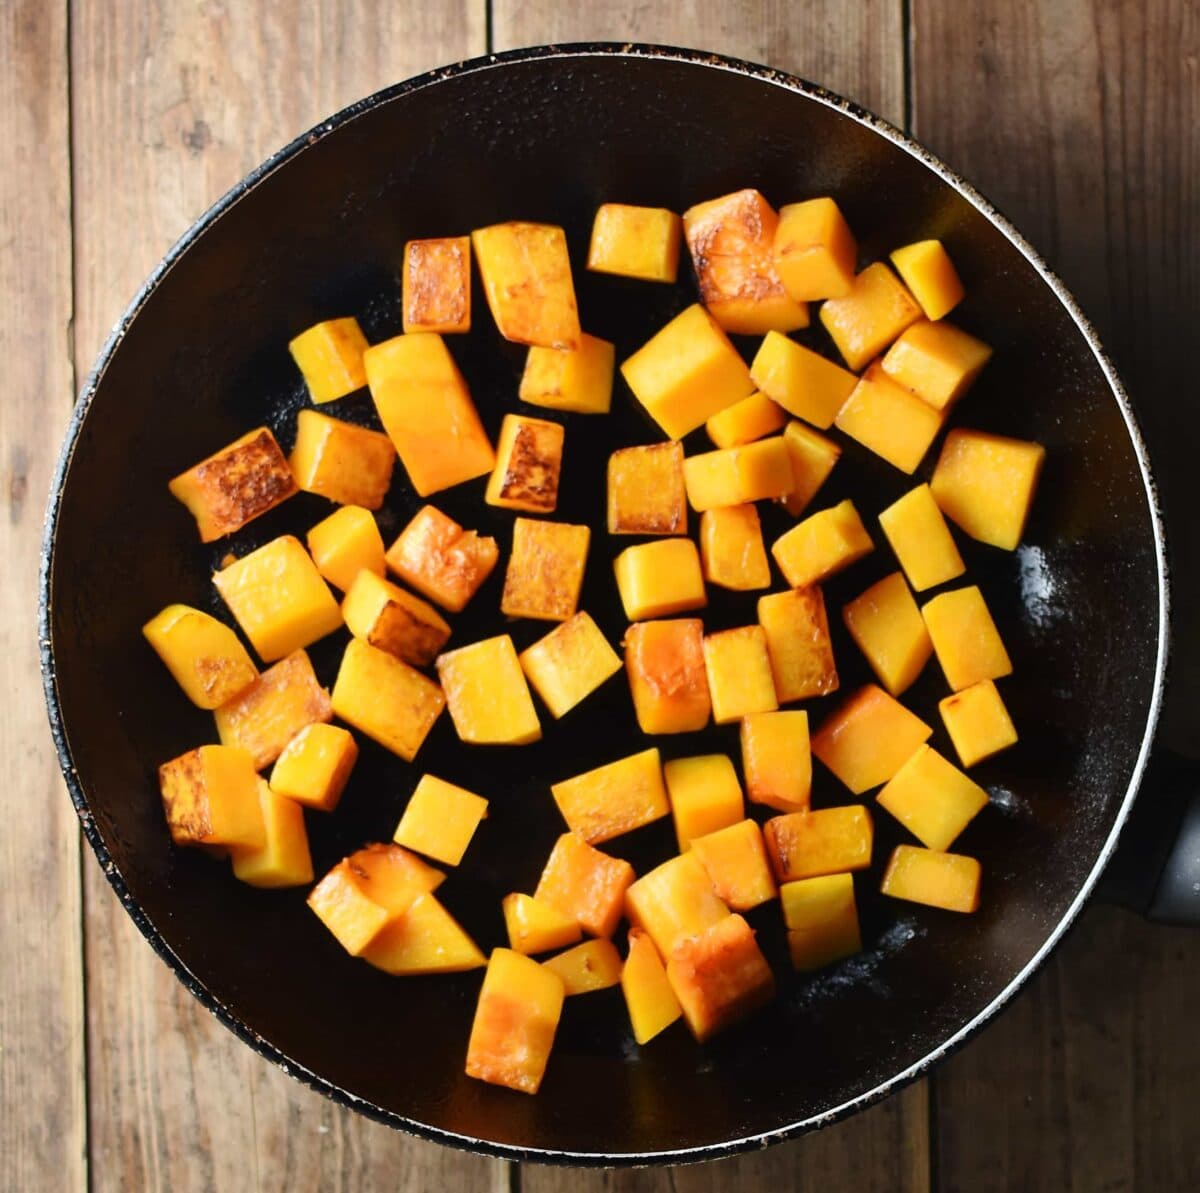 Cubed fried squash in large pan.